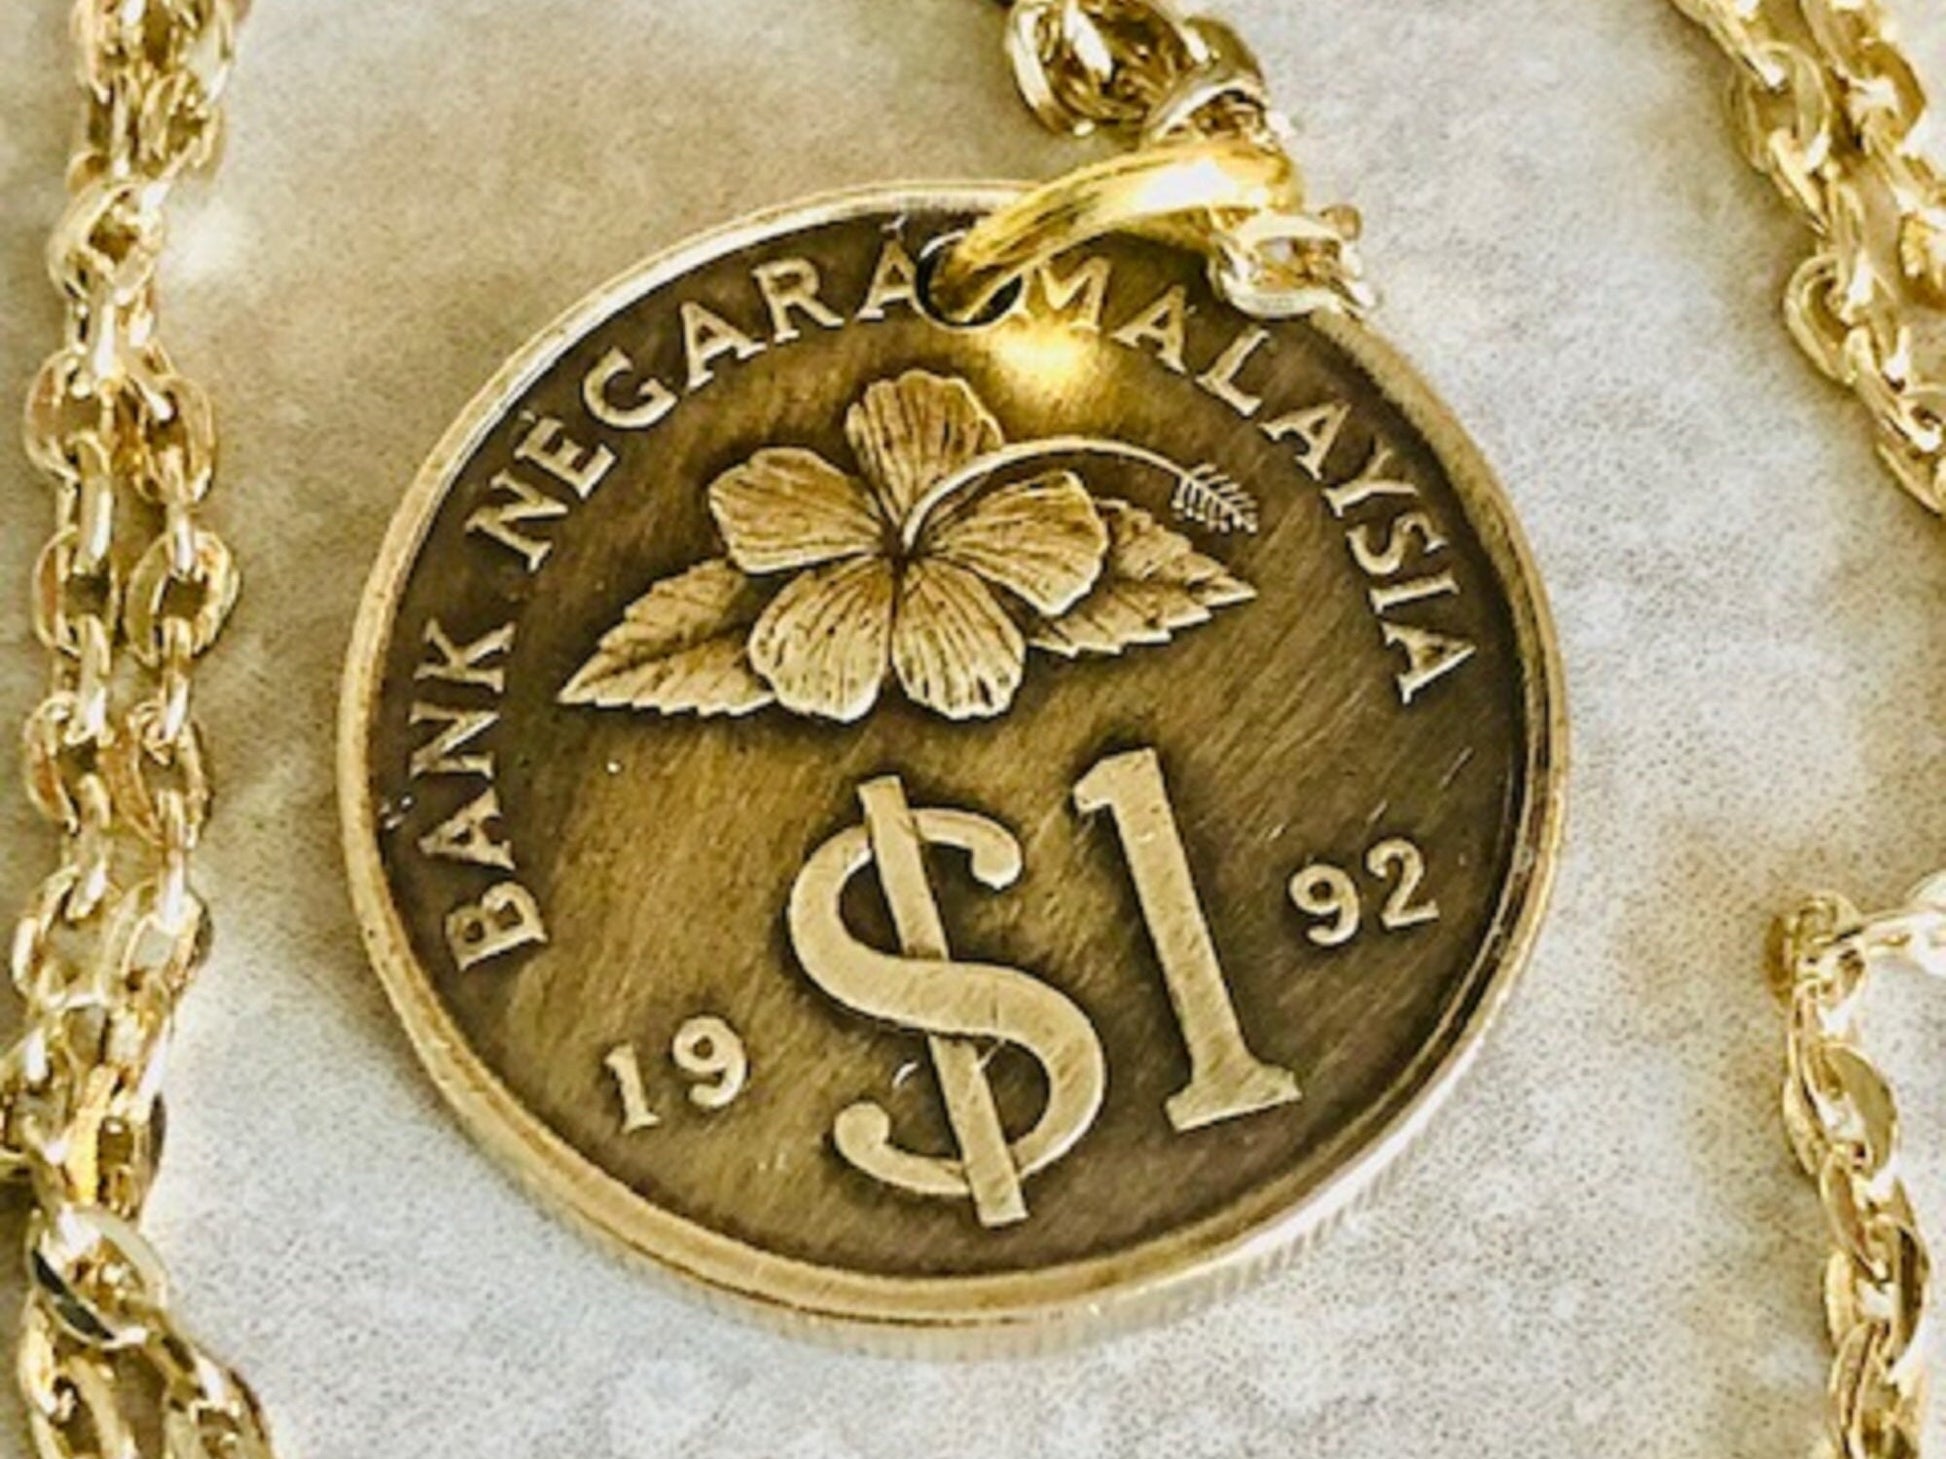 Malaysia Coin Dollar Pendant Necklace Malaysian Personal Old Vintage Handmade Jewelry Gift Friend Charm For Him Her World Coin Collector